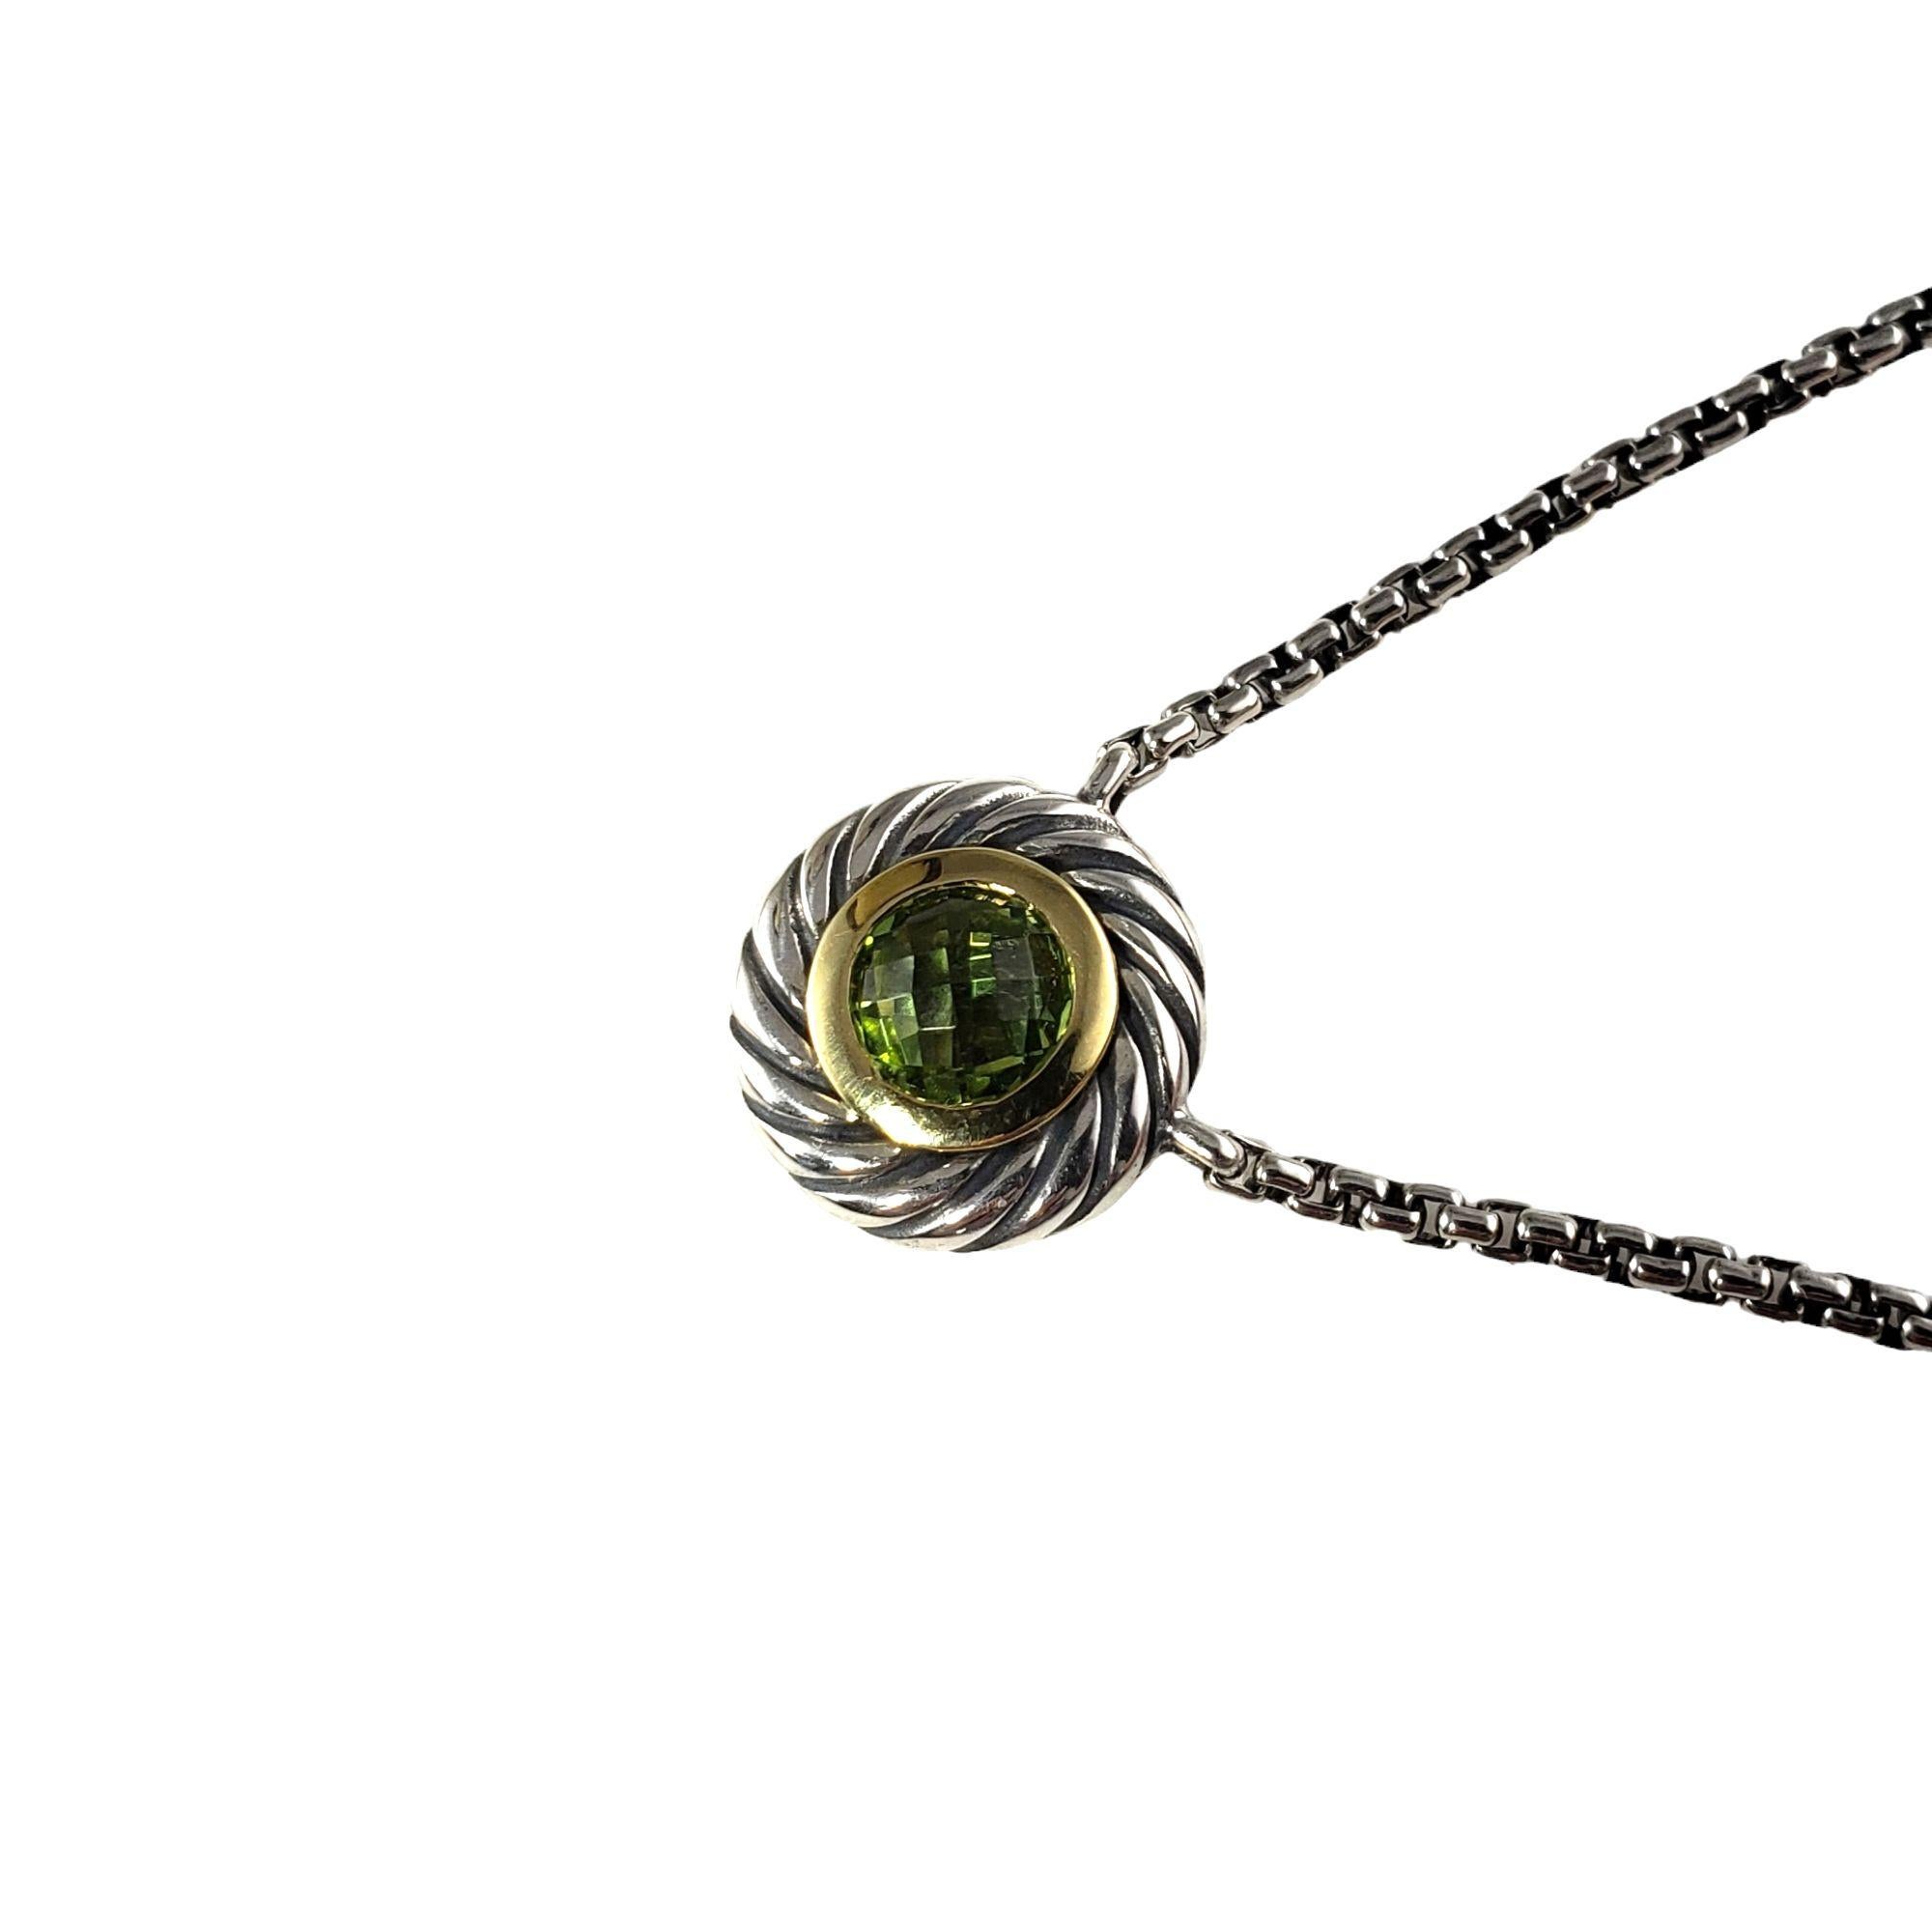 Vintage David Yurman Sterling Silver/18 Karat Yellow Gold and Peridot Cookie Necklace-

This lovely David Yurman pendant necklace features one faceted peridot (5 mm) set in beautifully detailed sterling silver and 18K yellow gold.

Size: 16.5 inches